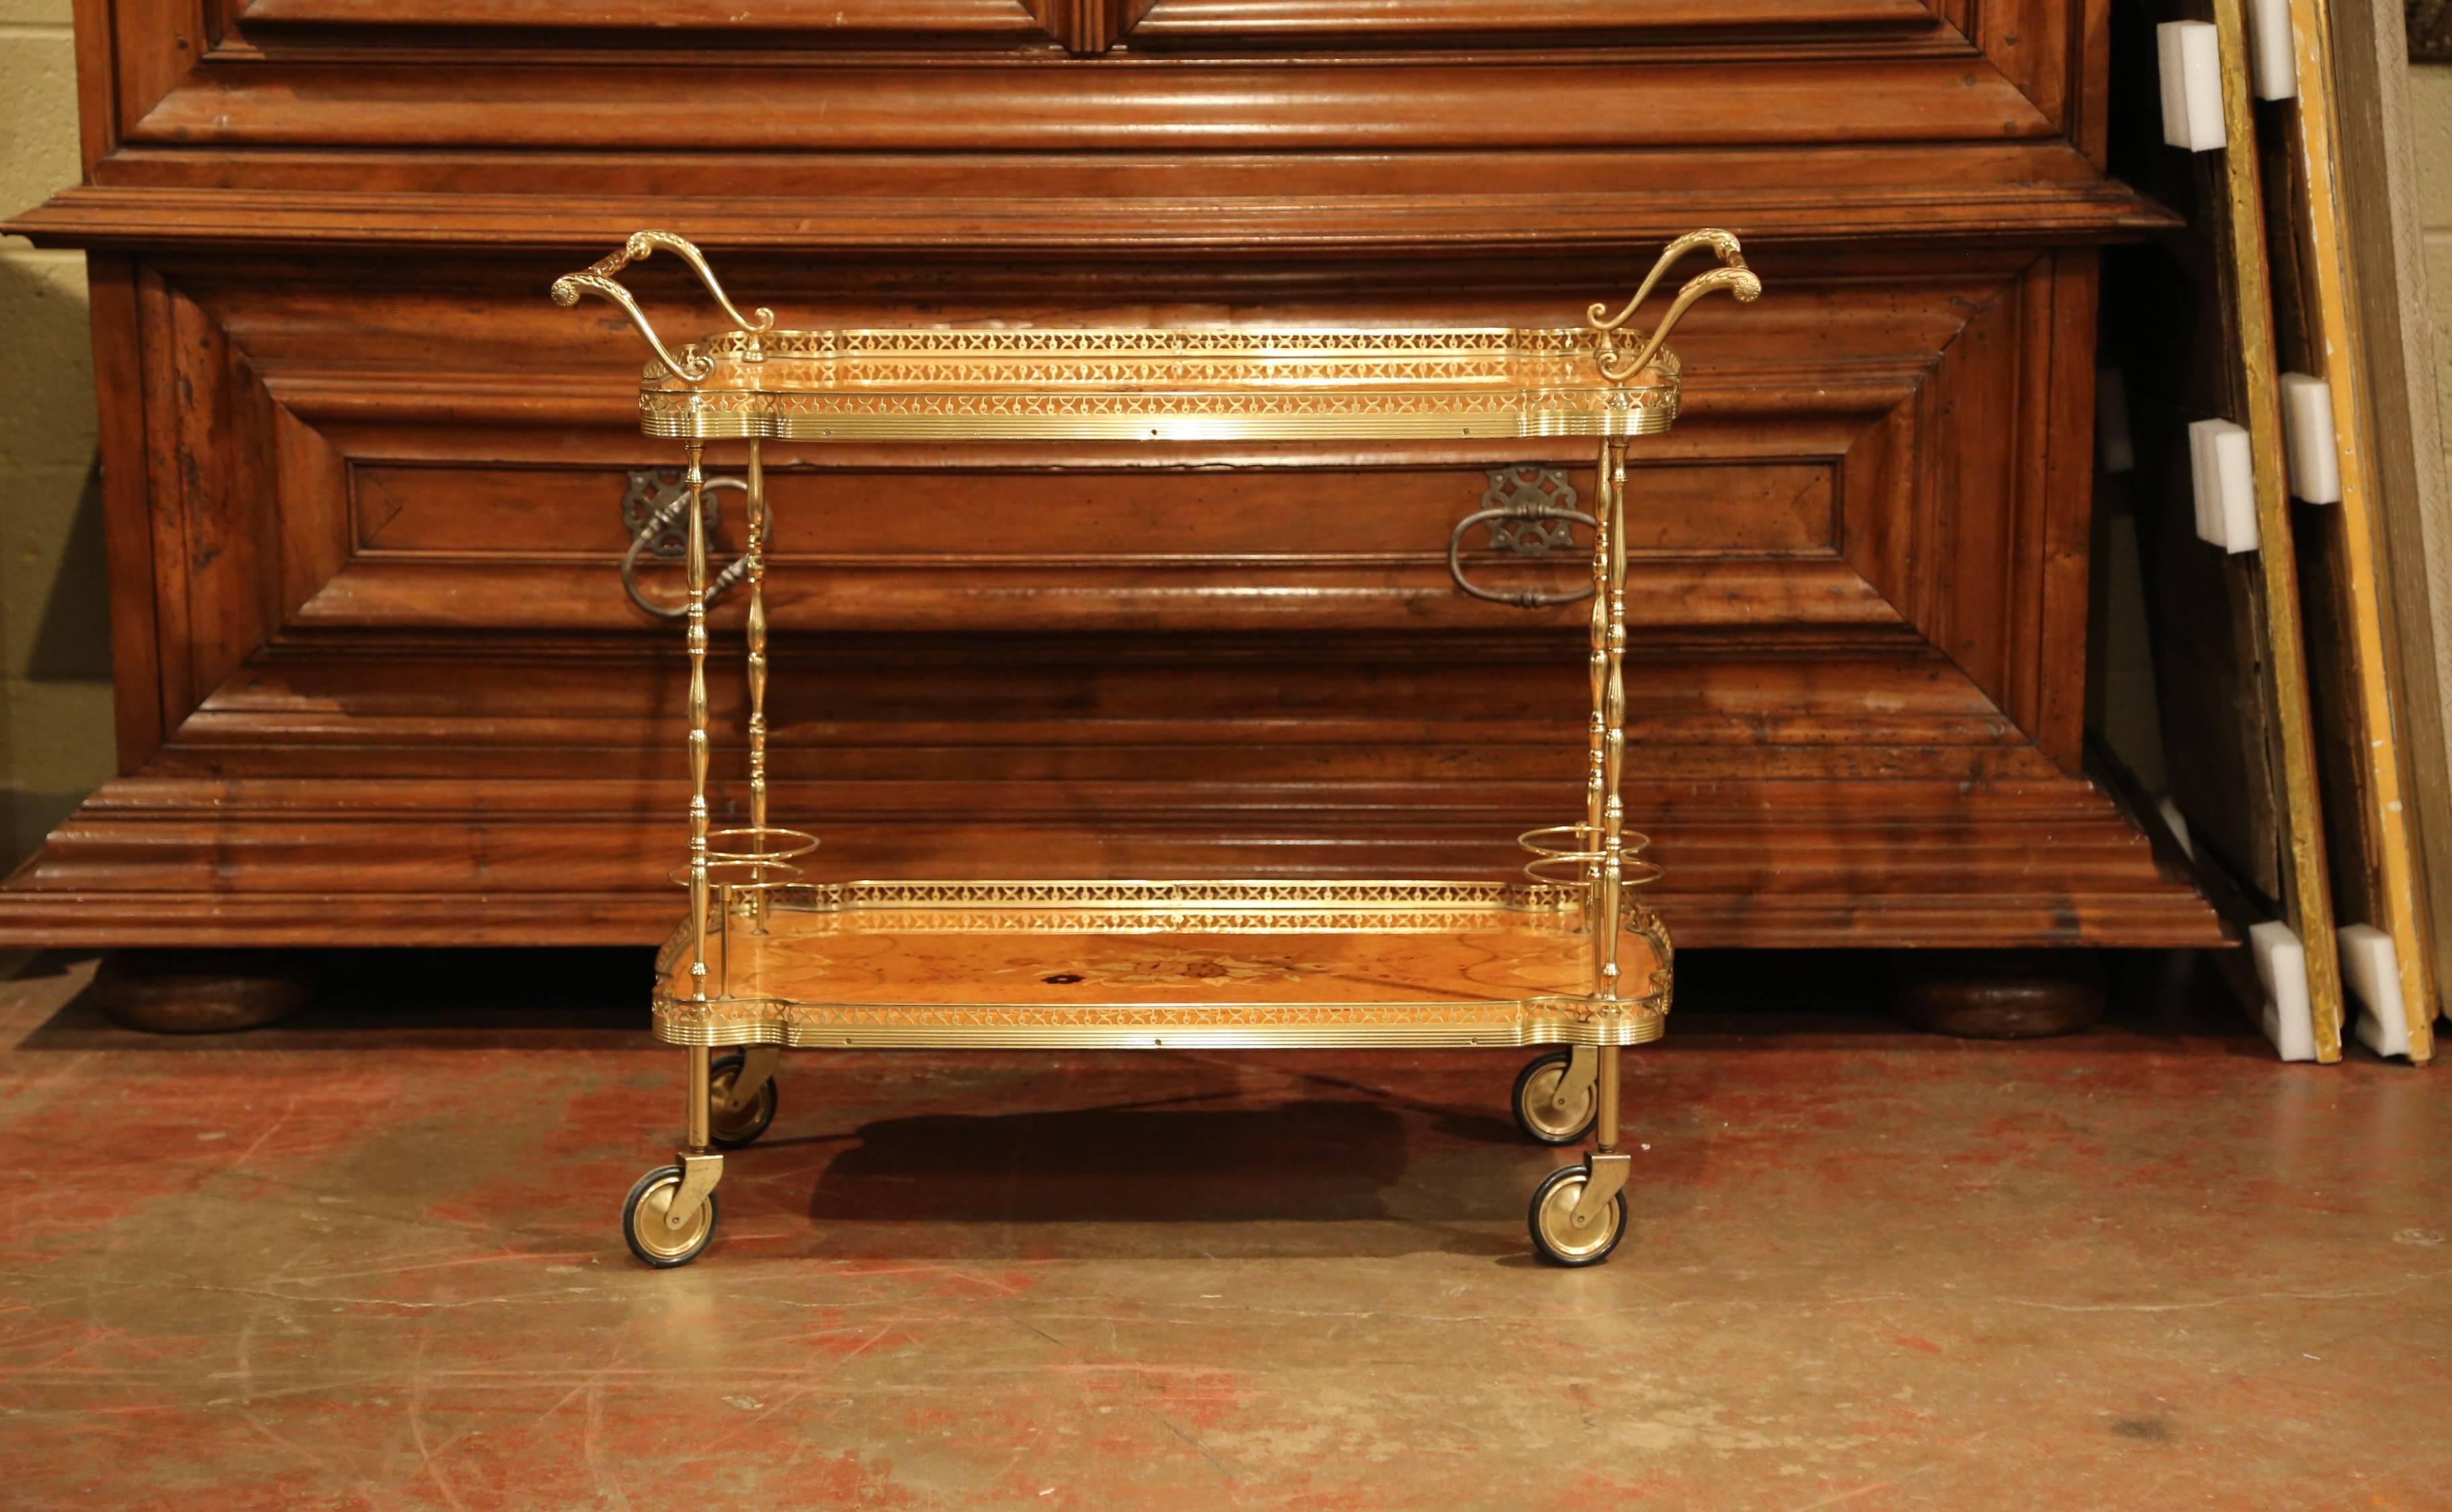 This fine wooden and brass cart was created in France, circa 1960. The brass cart sits on four wheels and features large handles on both sides of the top deck. The two decks feature a decorative brass gallery around the perimeter, and both surfaces